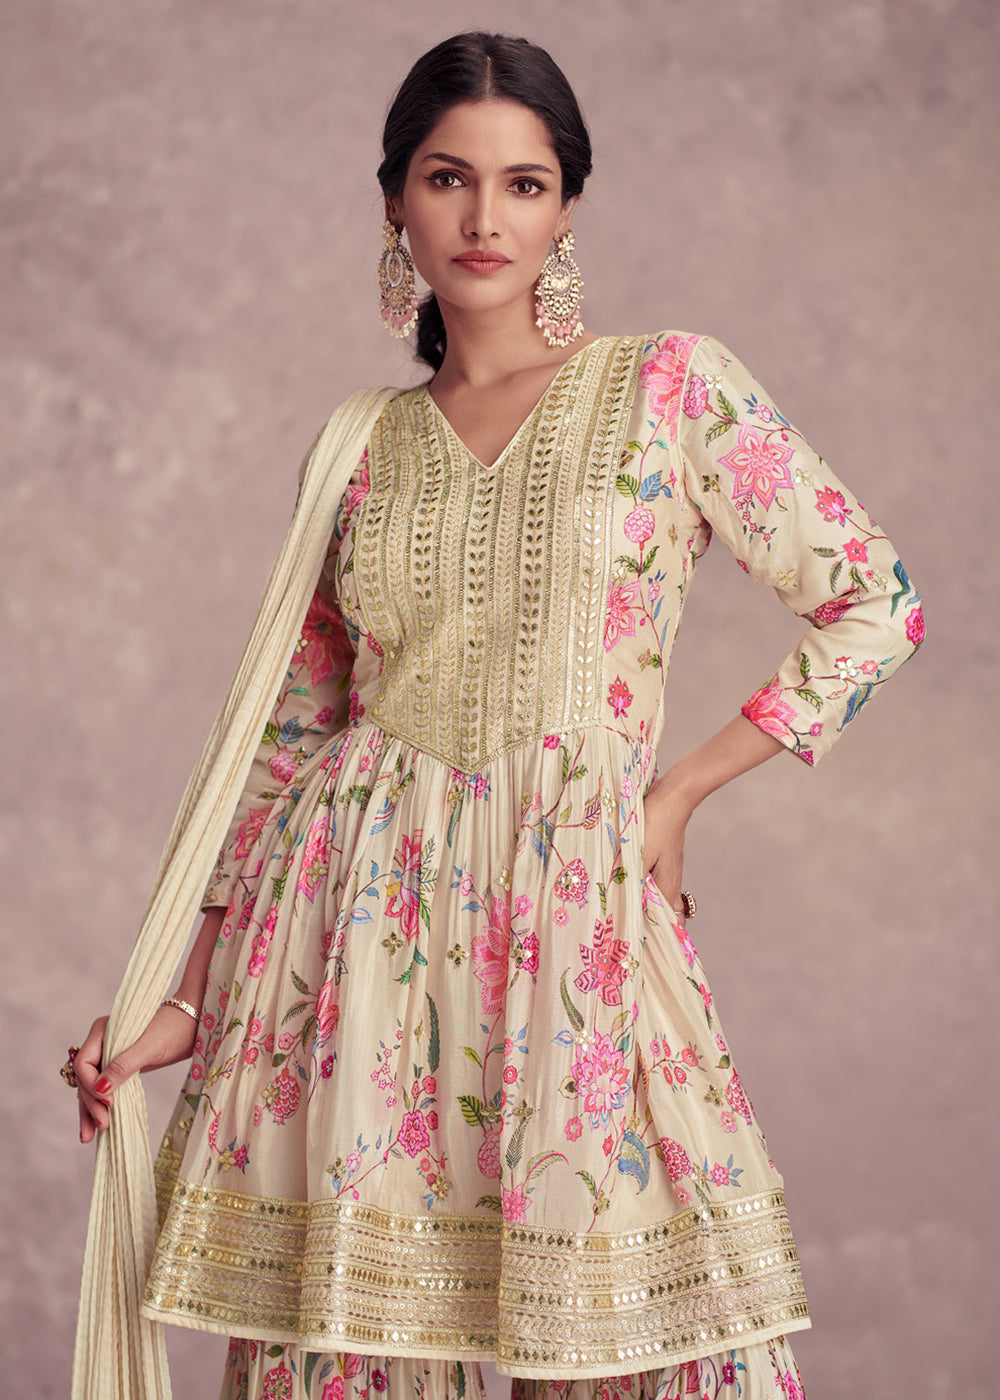 Shop Now Cream Embroidered & Digital Printed Festive Gharara Suit Online at Empress Clothing in USA, UK, Canada, Italy & Worldwide.